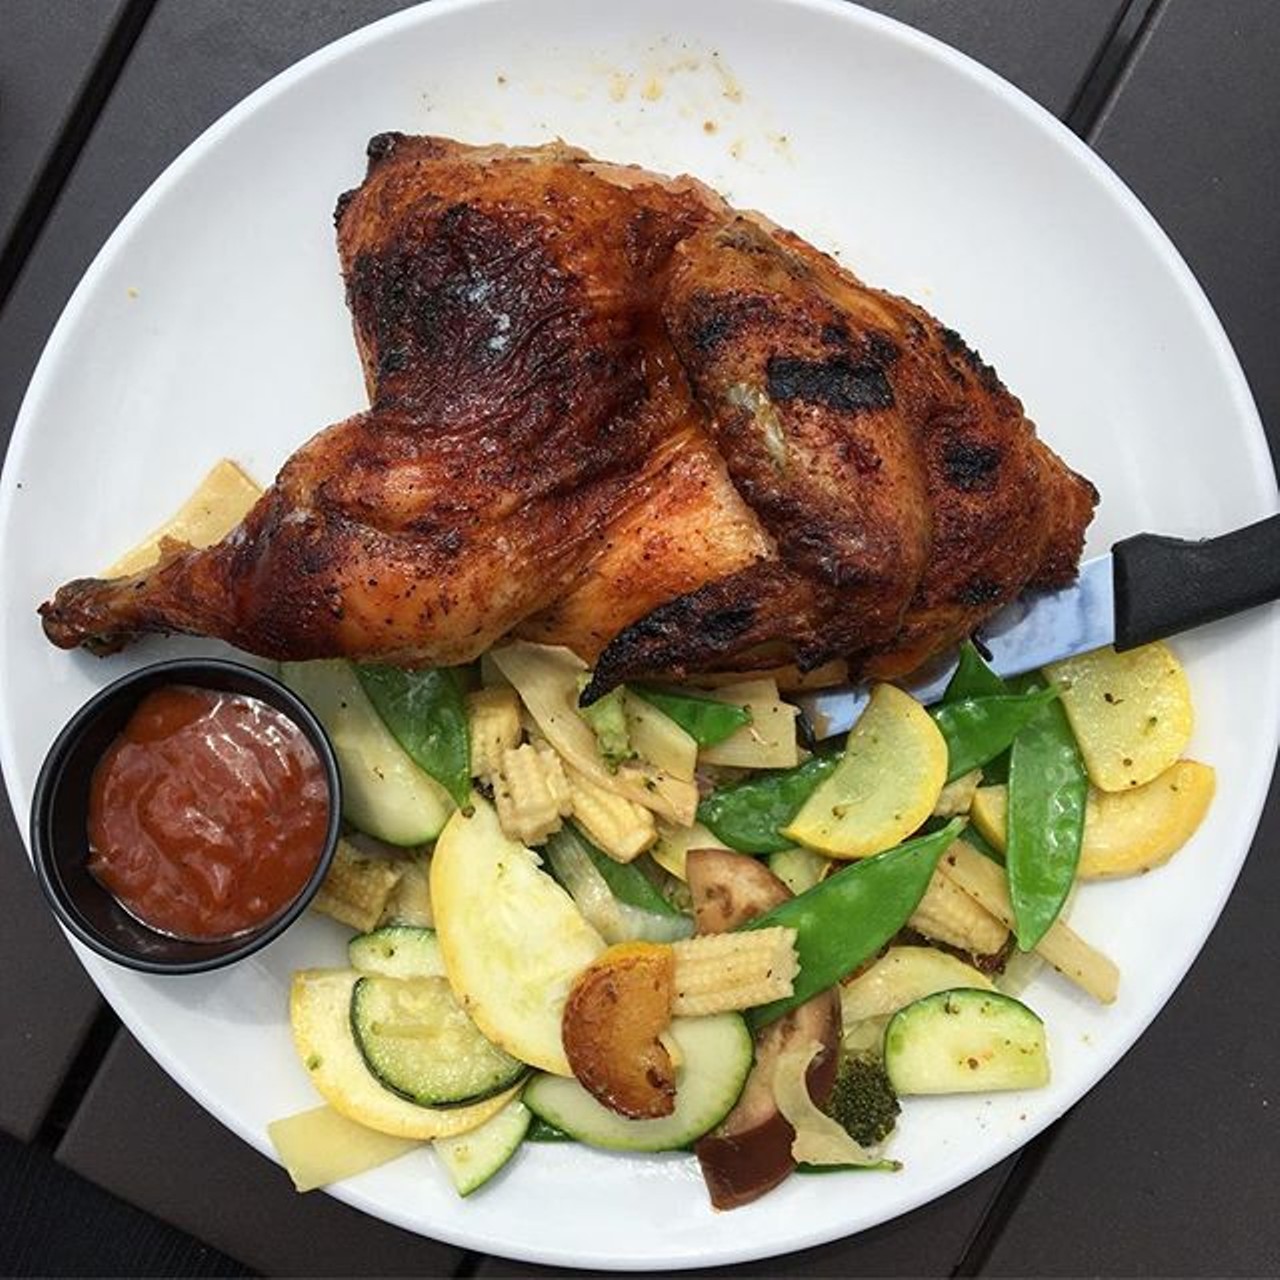 The rotisserie chicken from Pig Floyds
1326 N. Mills Ave., 407-203-0866
There are only a few rotisserie chickens smoked each day. They sell out fast, so plan ahead because it&#146;s like nothing you have ever tasted.
Photo via otownbites/Instagram